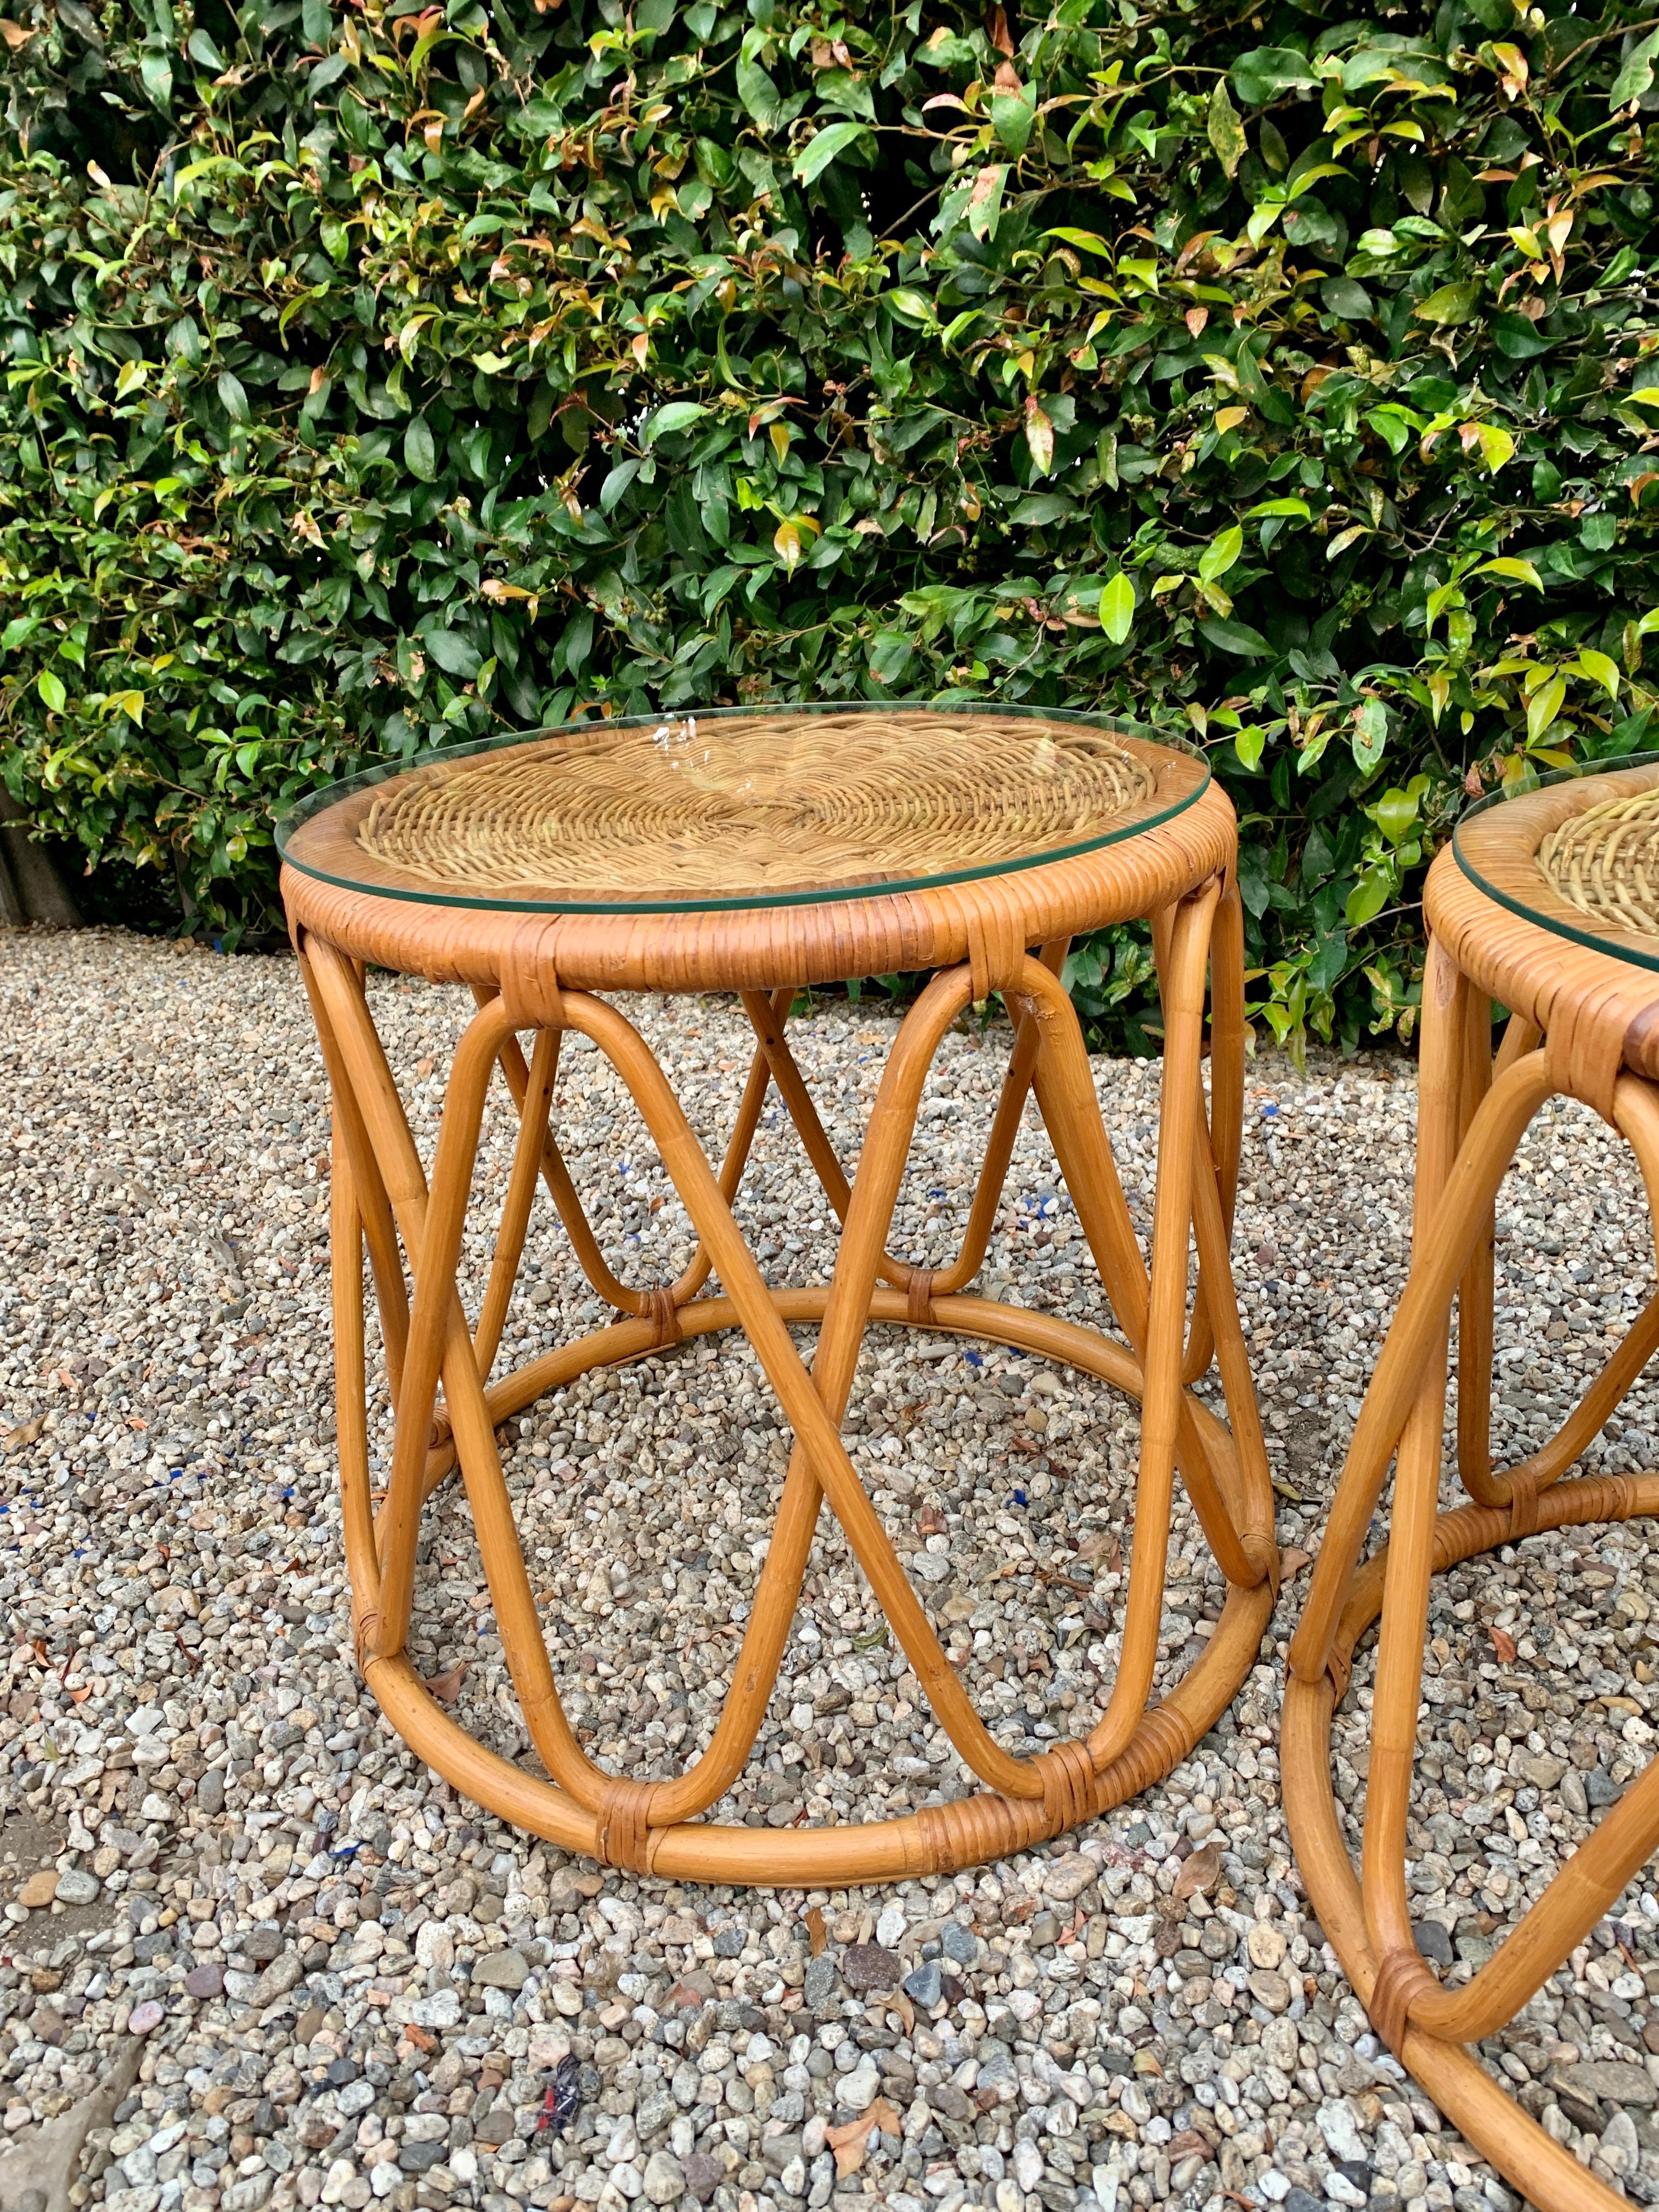 A pair of Bent rattan tables - a very pleasing criss-cross pattern and slightly larger at the bottom. Each table has a round piece of glass. These, with a cushion would also be very functional as an ottoman.